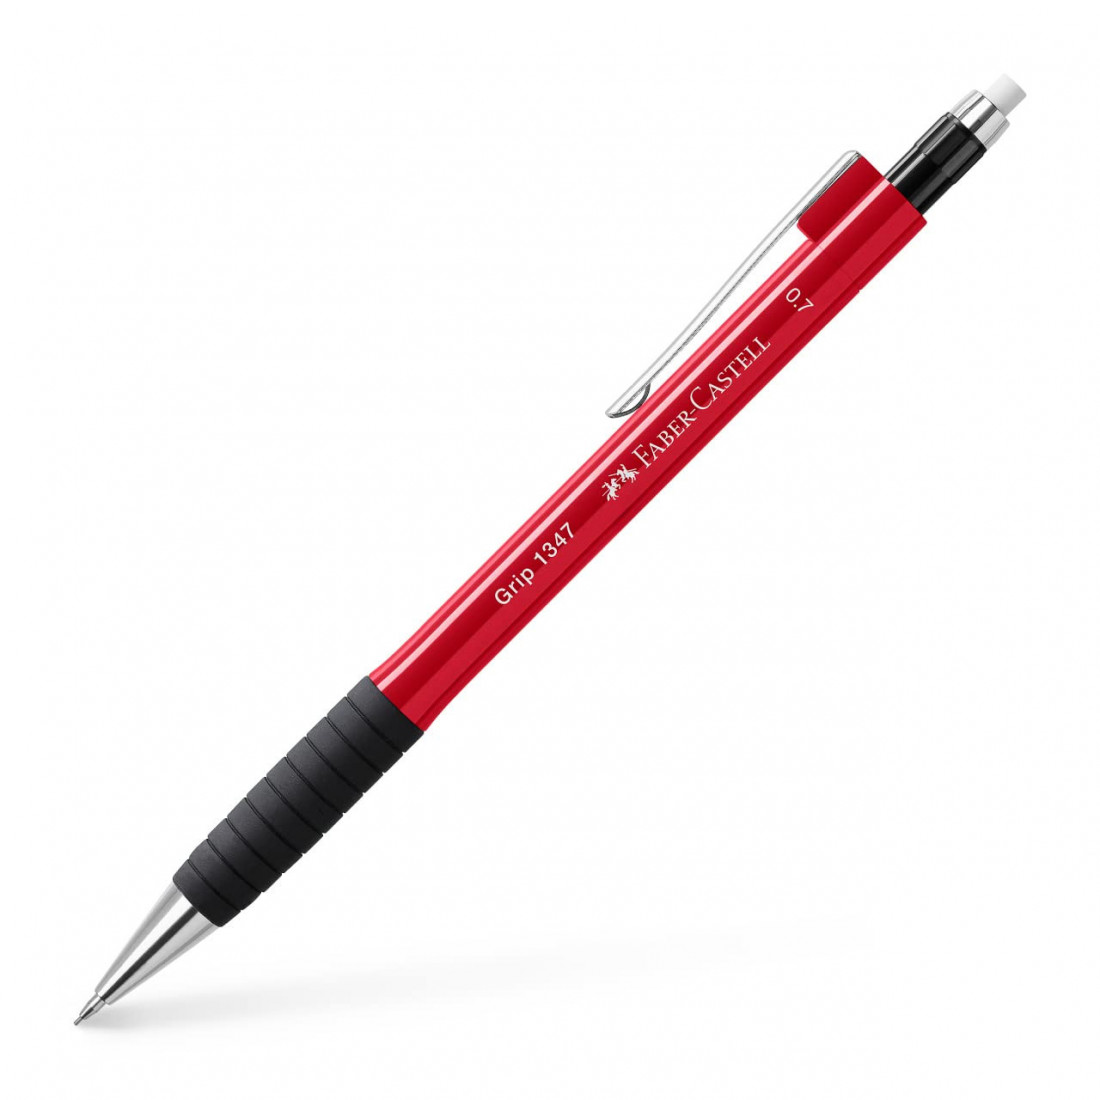 Mechanical Pencil Grip II 0.7mm Bright Red 1347 Faber Castell